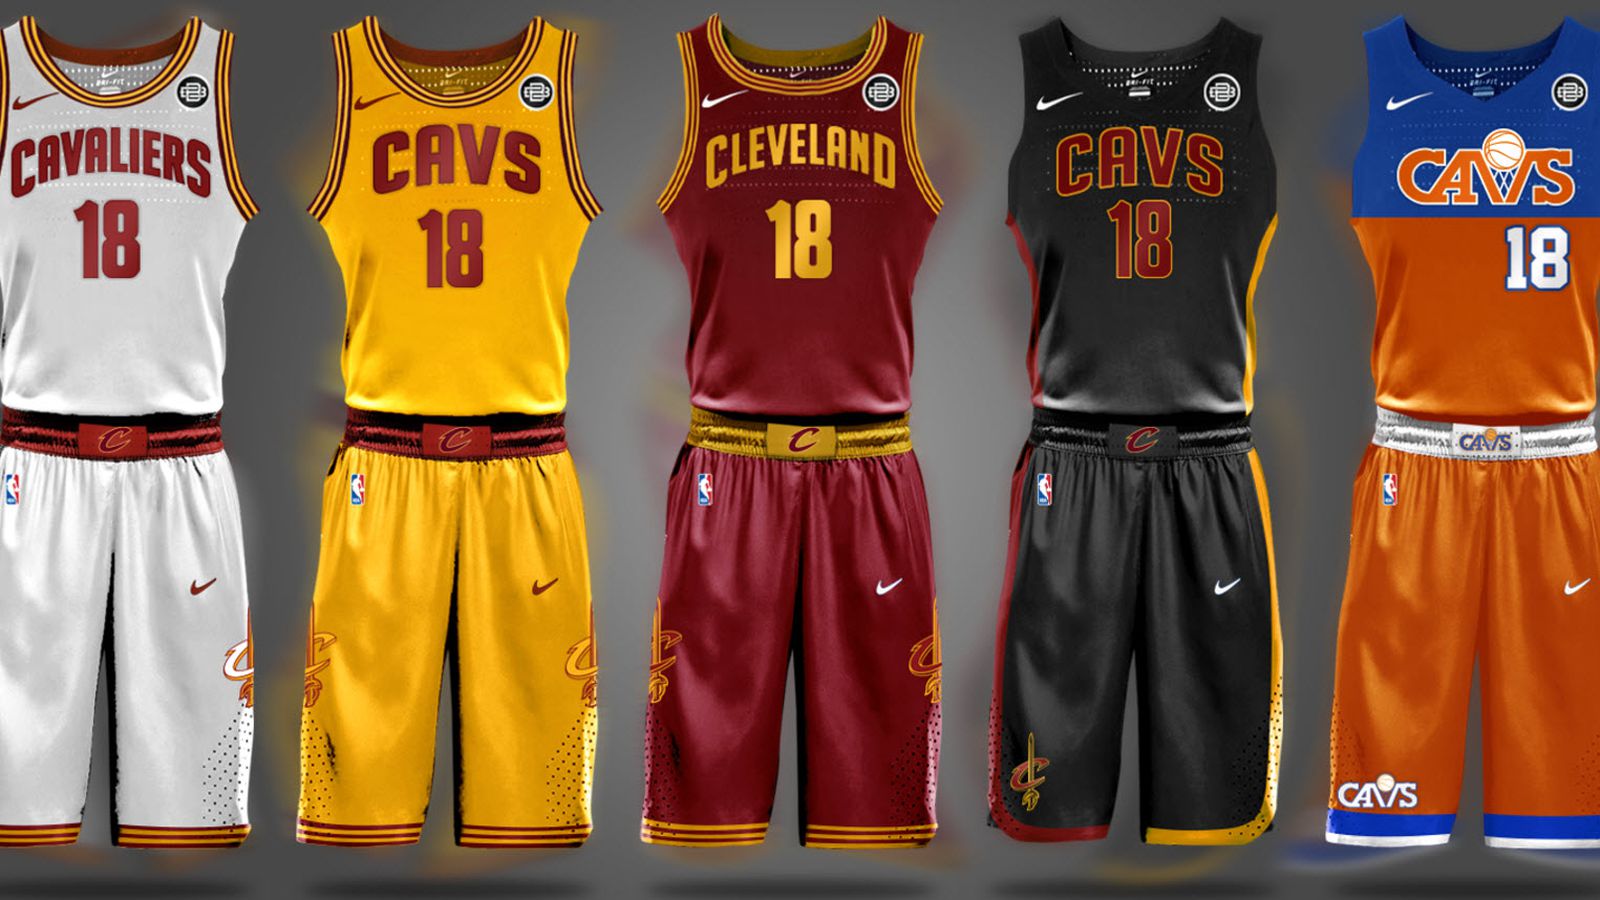 Look: Here’s one potential design for the Cavaliers’ new []jerseys<img src=